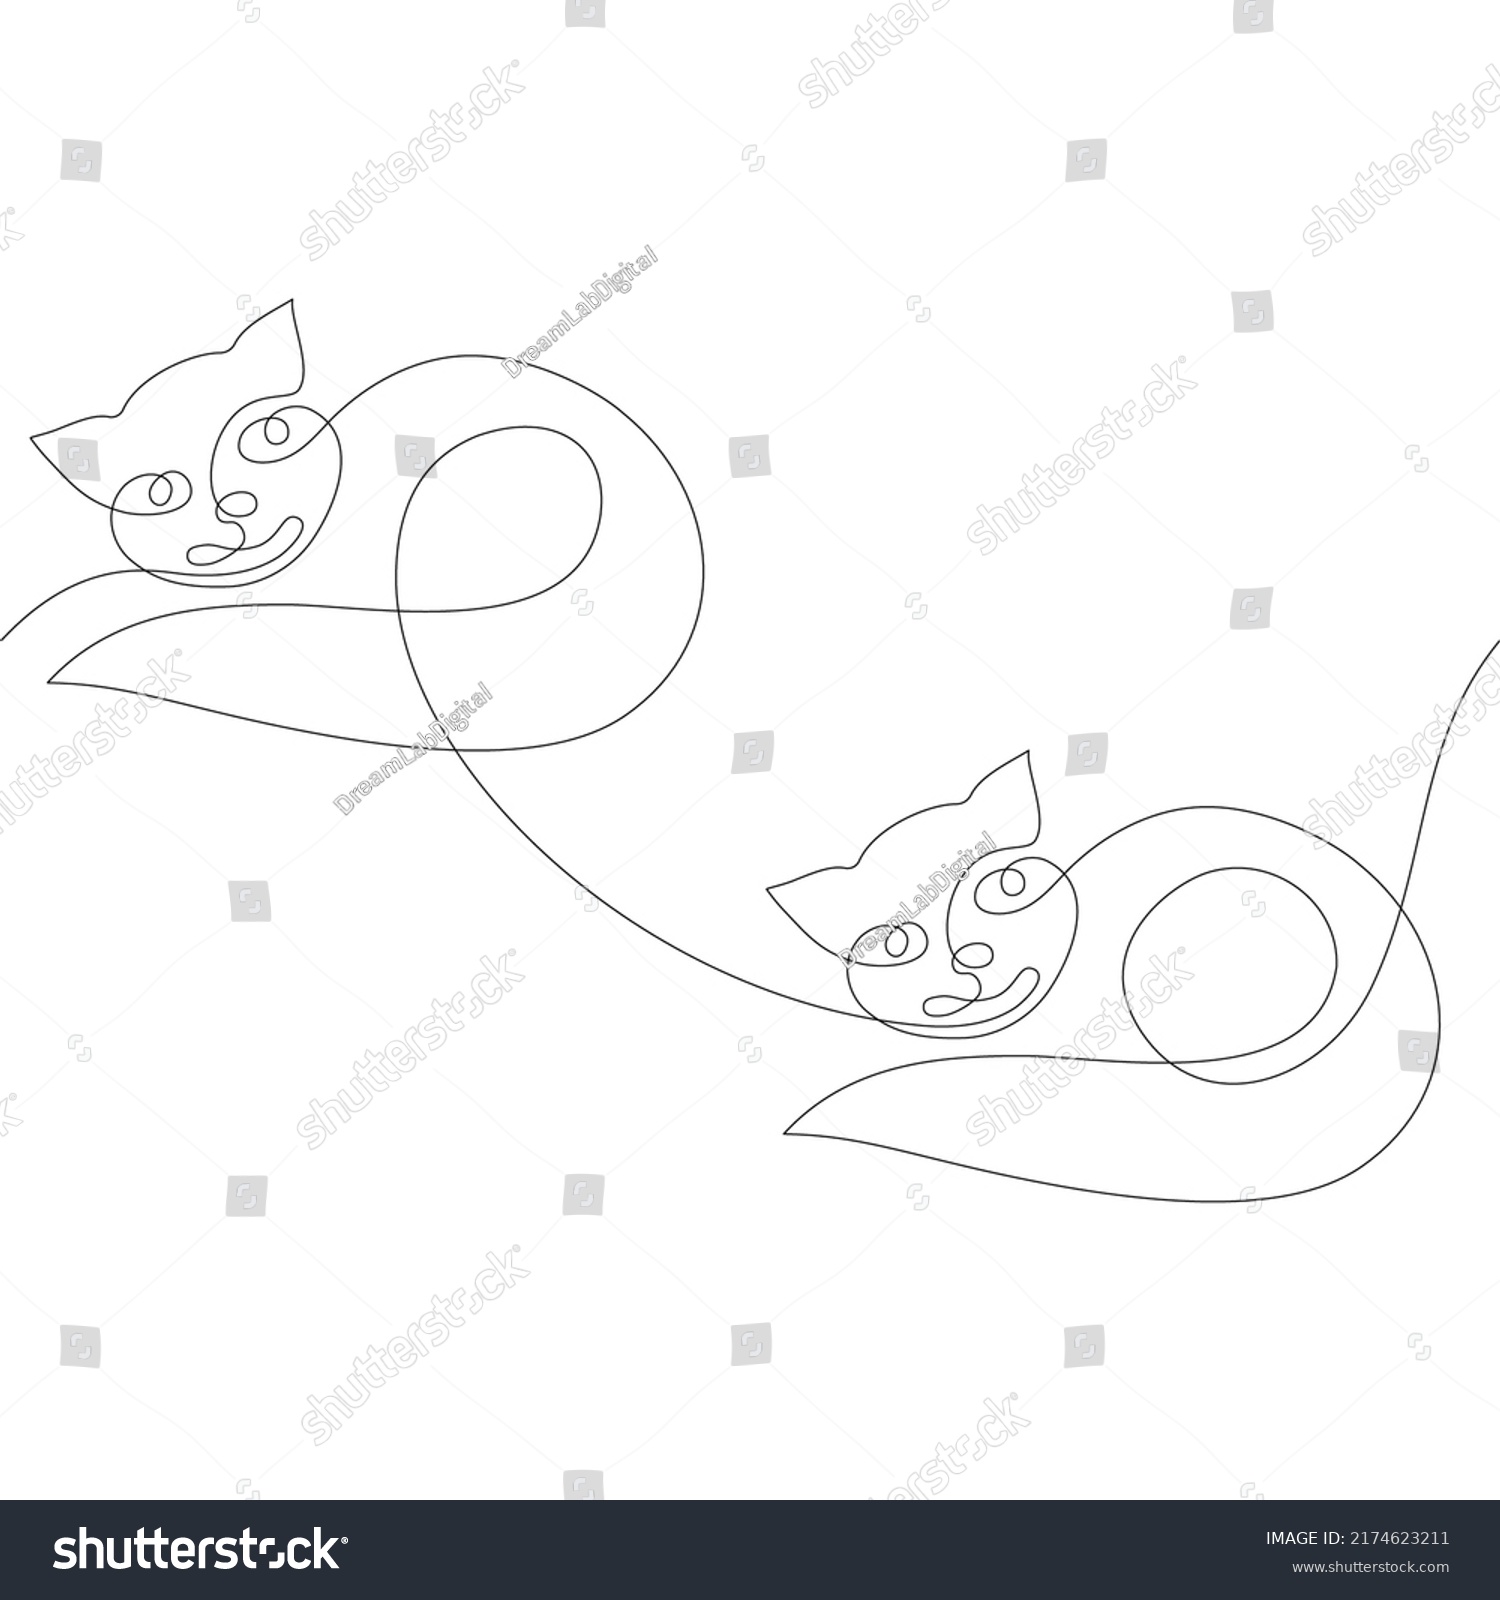 SVG of Cute cats seamless one line continuous drawing for sewing, stitching, quilting. Children textile craft pattern. svg